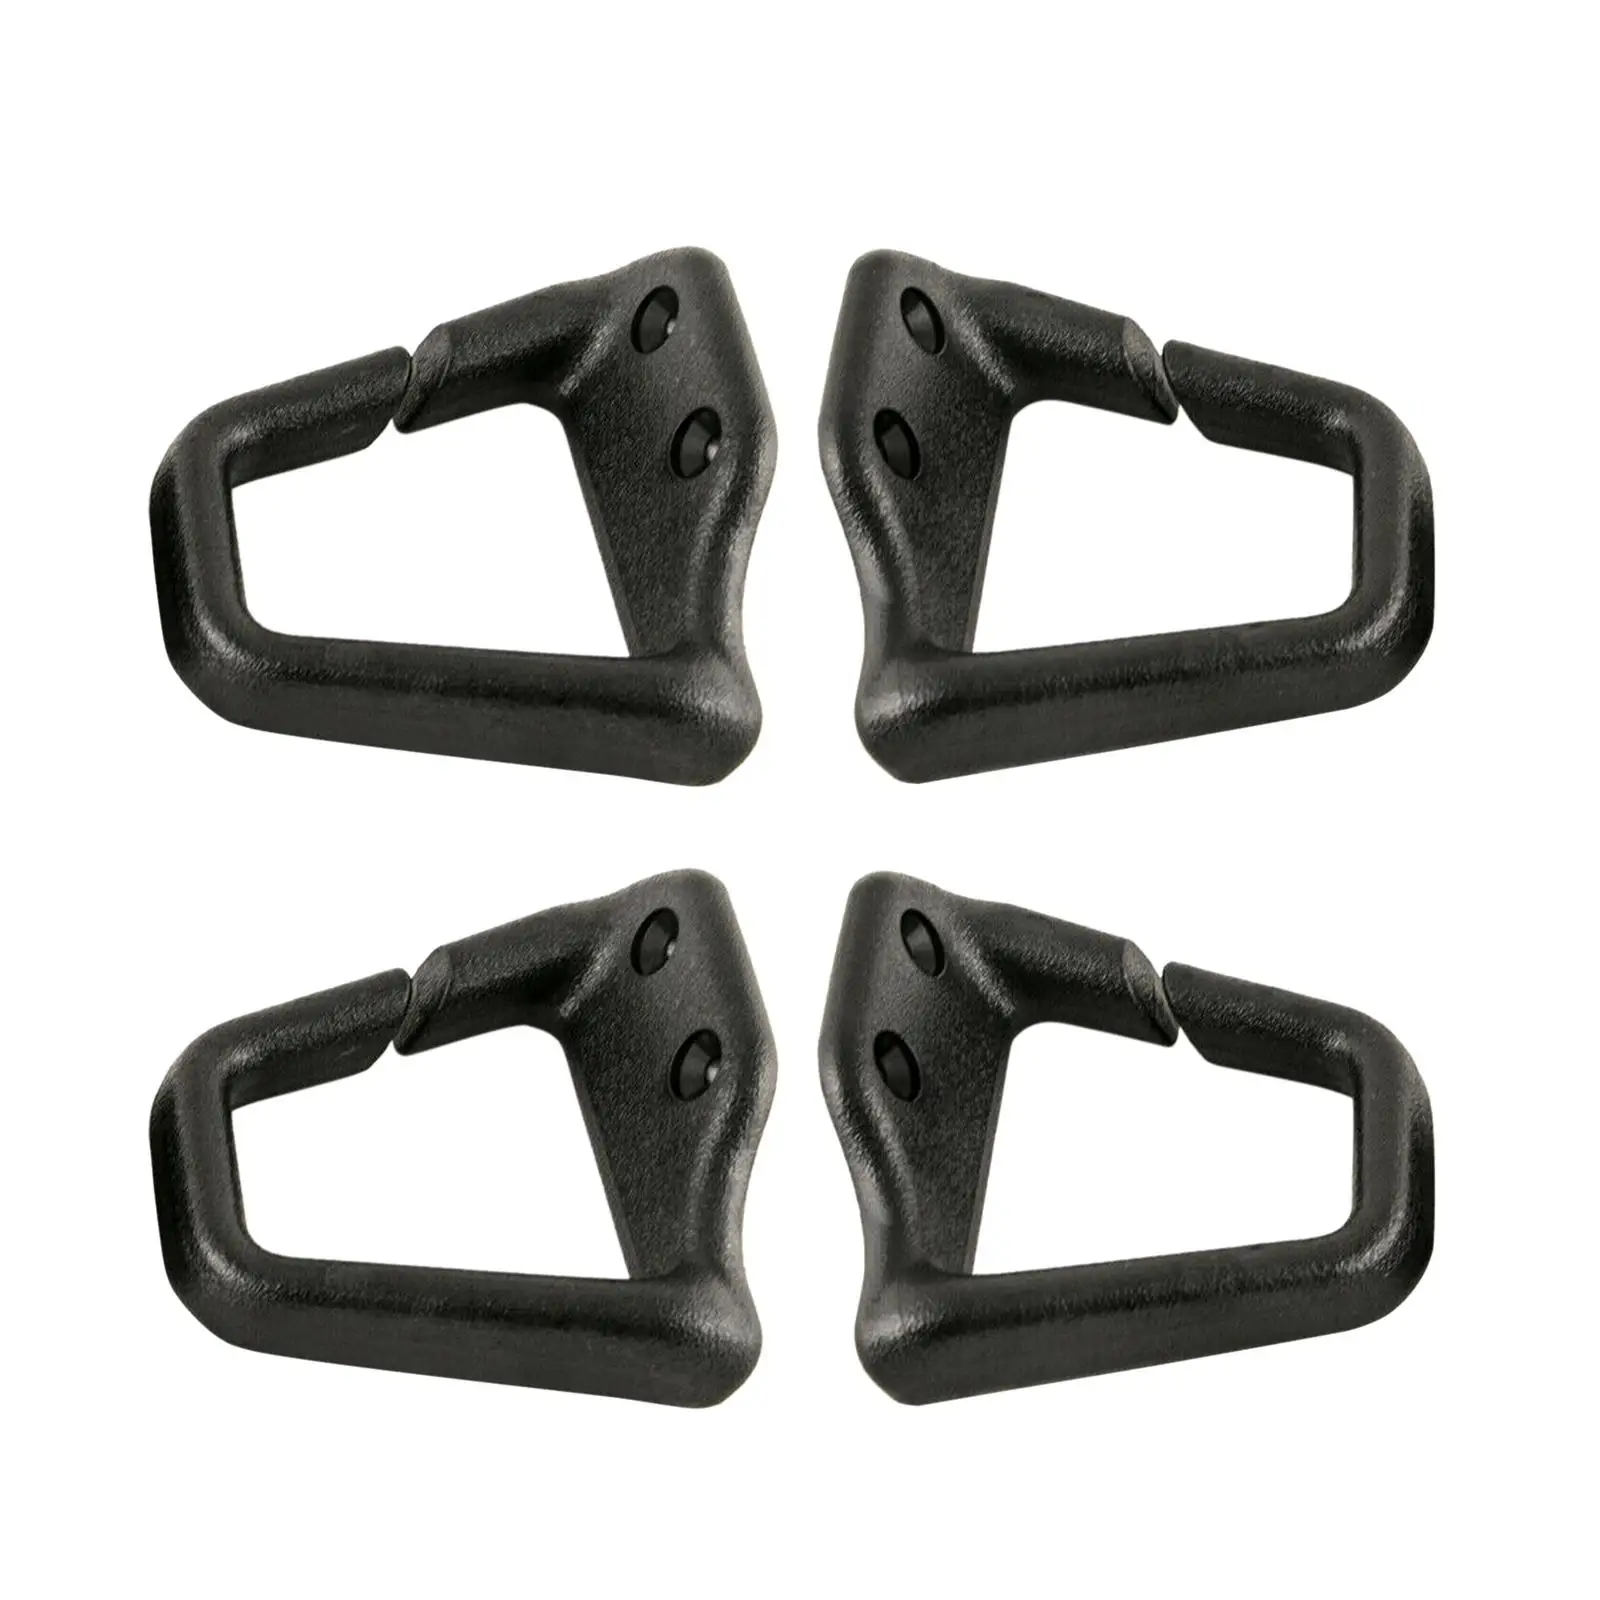  Vehicle   Clips Buckle Stopper Front Black Clamp Adjuster   Loops Fit for   93-02 Replacement